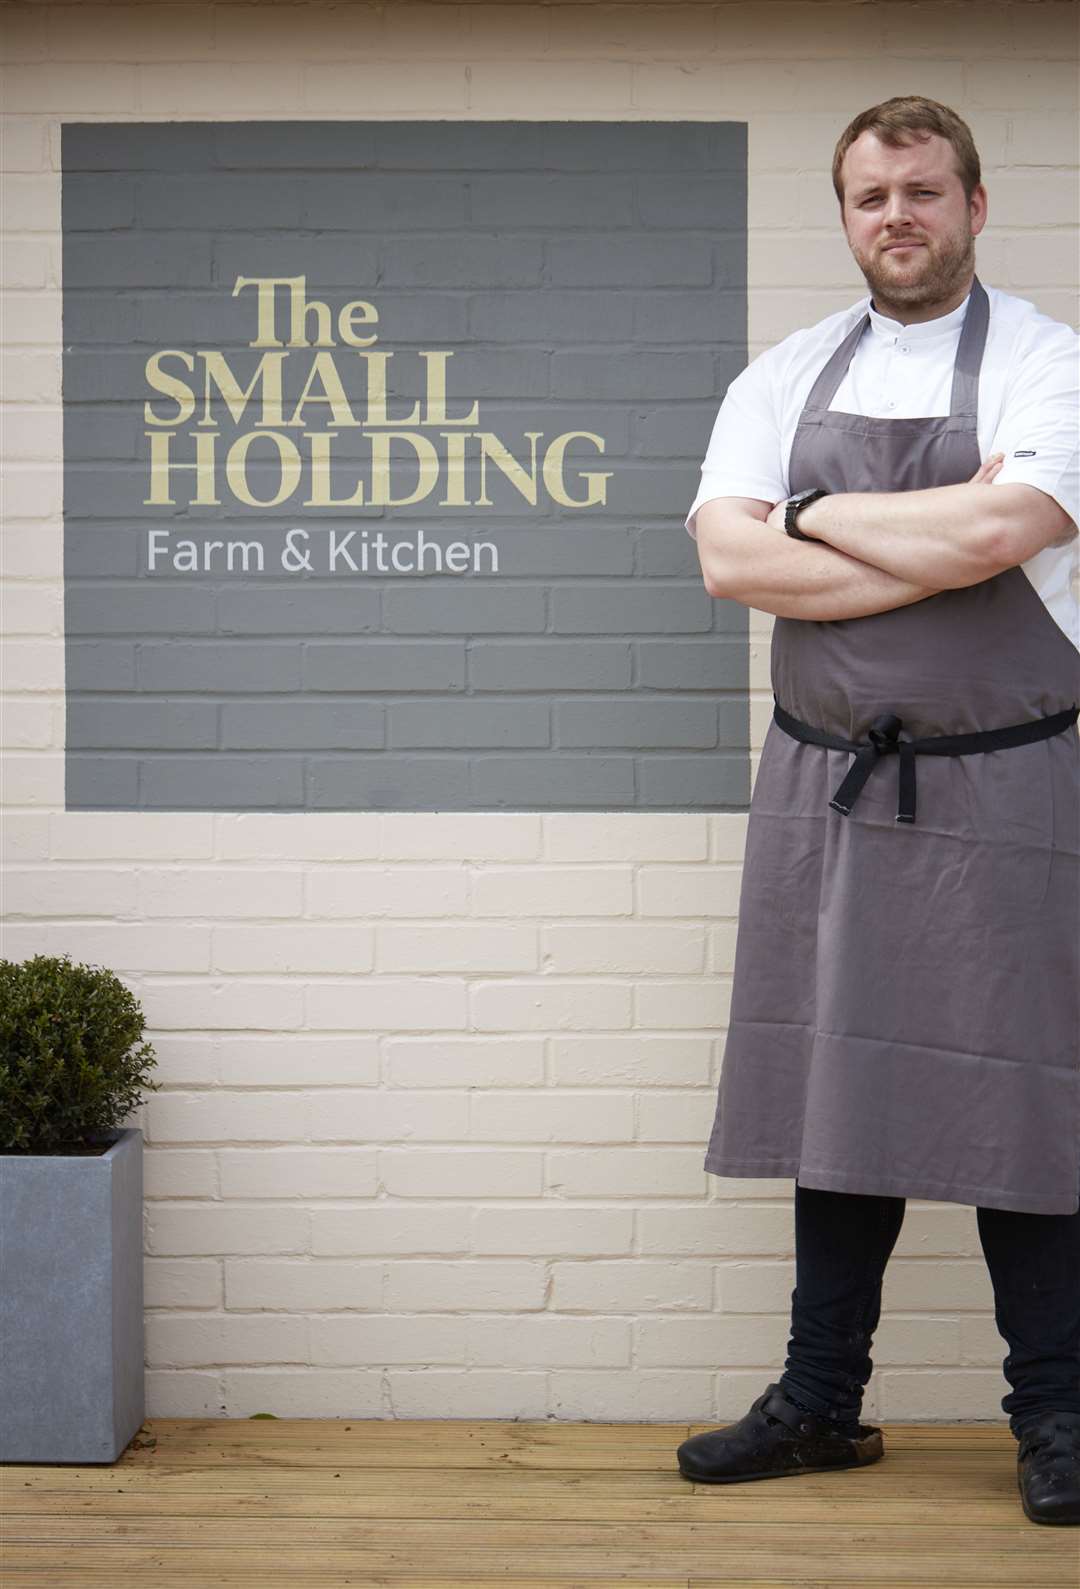 Chef Will Devlin who grows most of the food for his restuarant on his small holding.